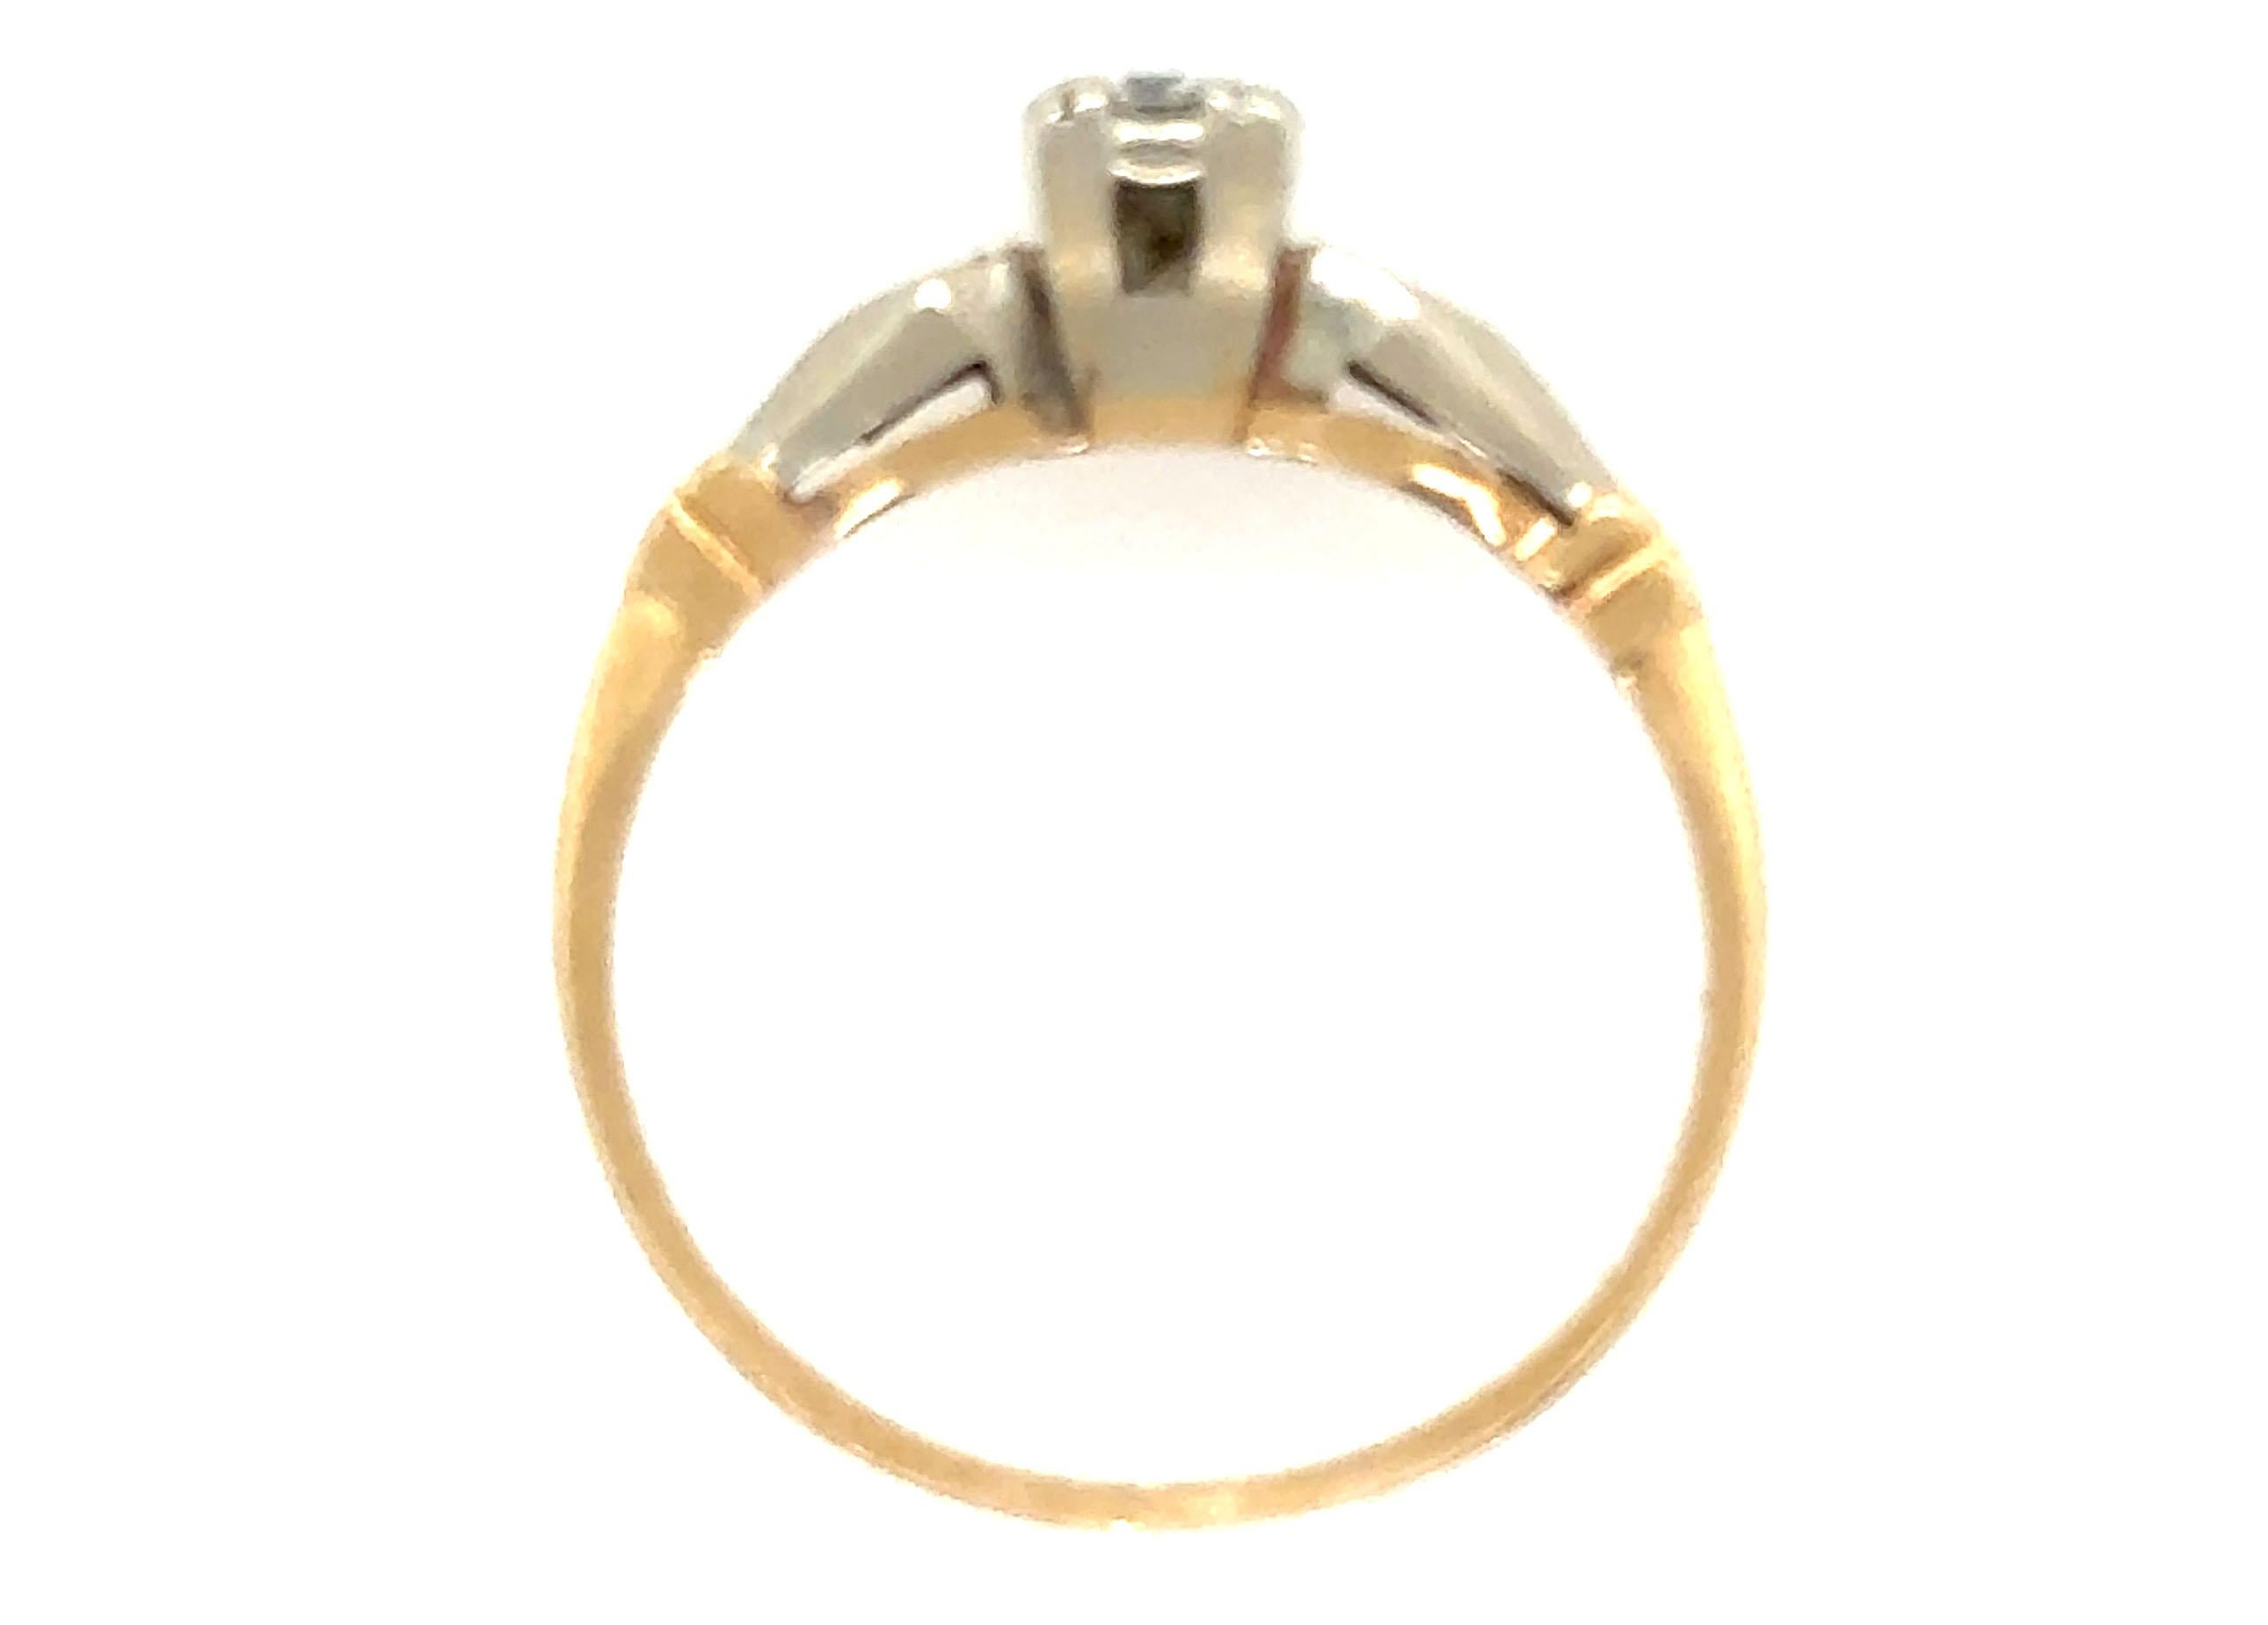 Genuine Original Antique from 1920's Diamond Solitaire Engagement Ring .12ct Transitional Cut 14K 


Featuring a Genuine .08ct Natural Transitional Cut Diamond Center

Yellow Gold Art Deco Ring With a White Gold Bridge and Head

Common for This Era,